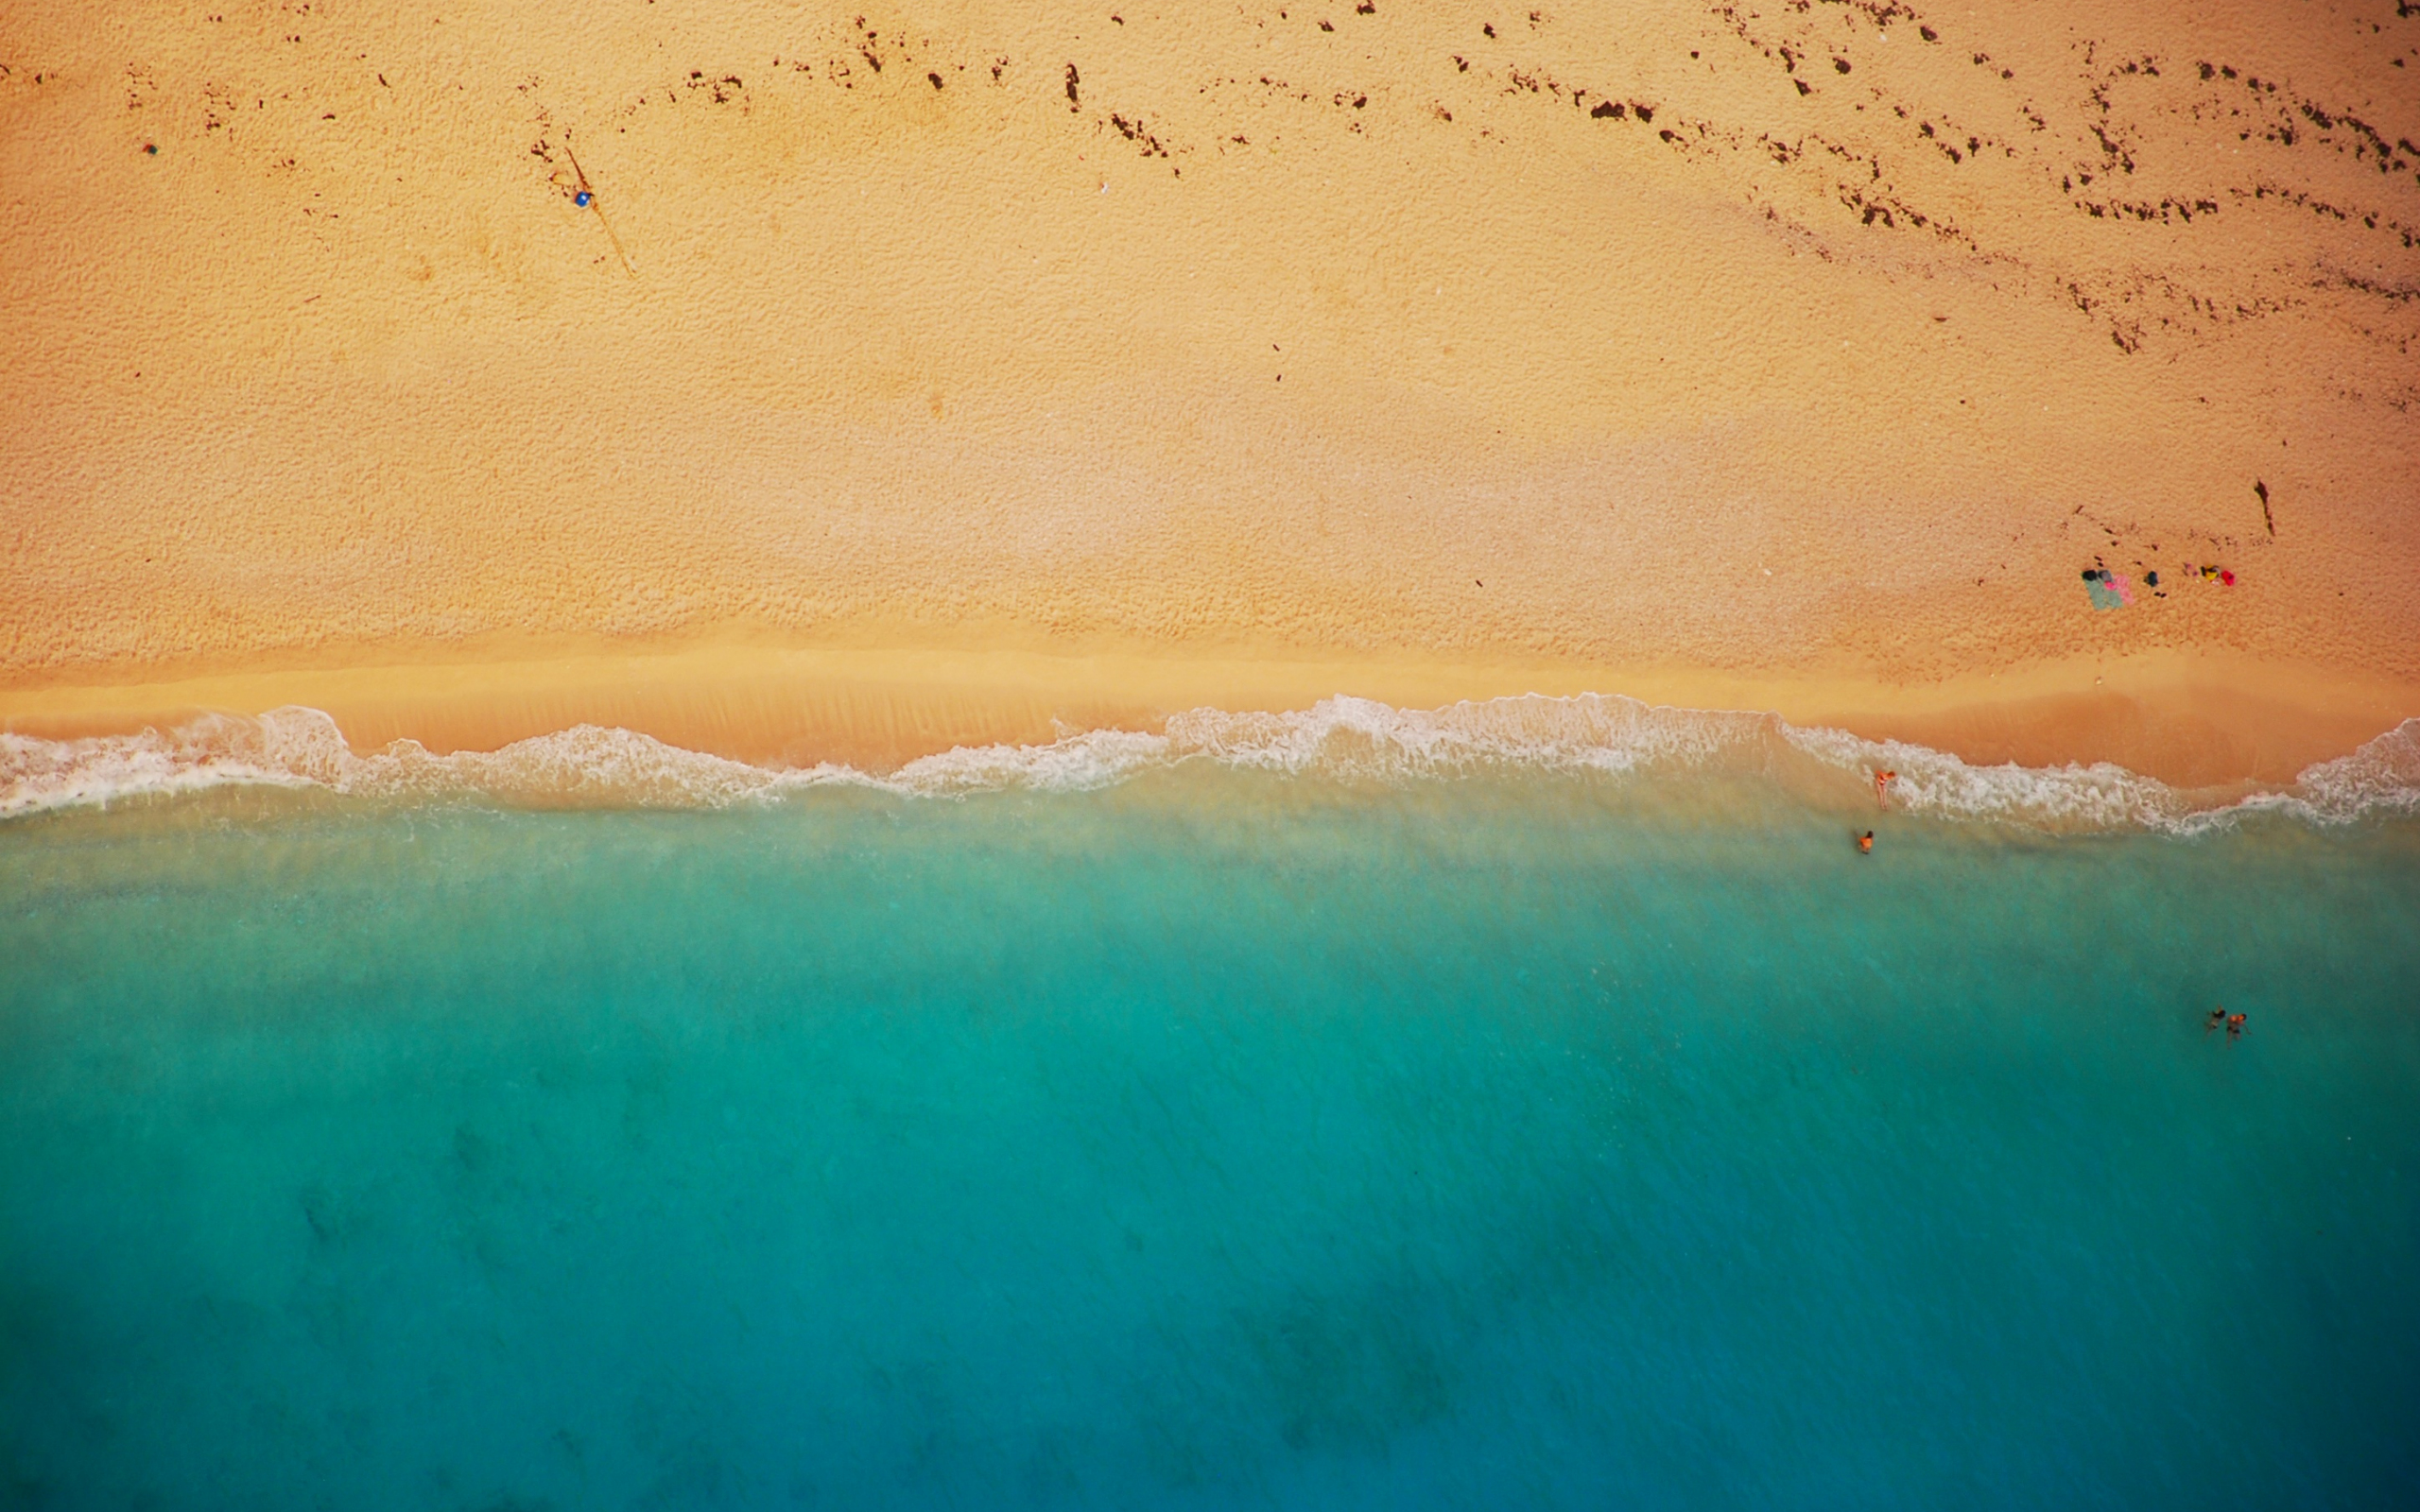 Download 2560x1600 Wallpaper Beach Aerial View Dual Wide Widescreen 16 10 Widescreen 2560x1600 Hd Image Background 631